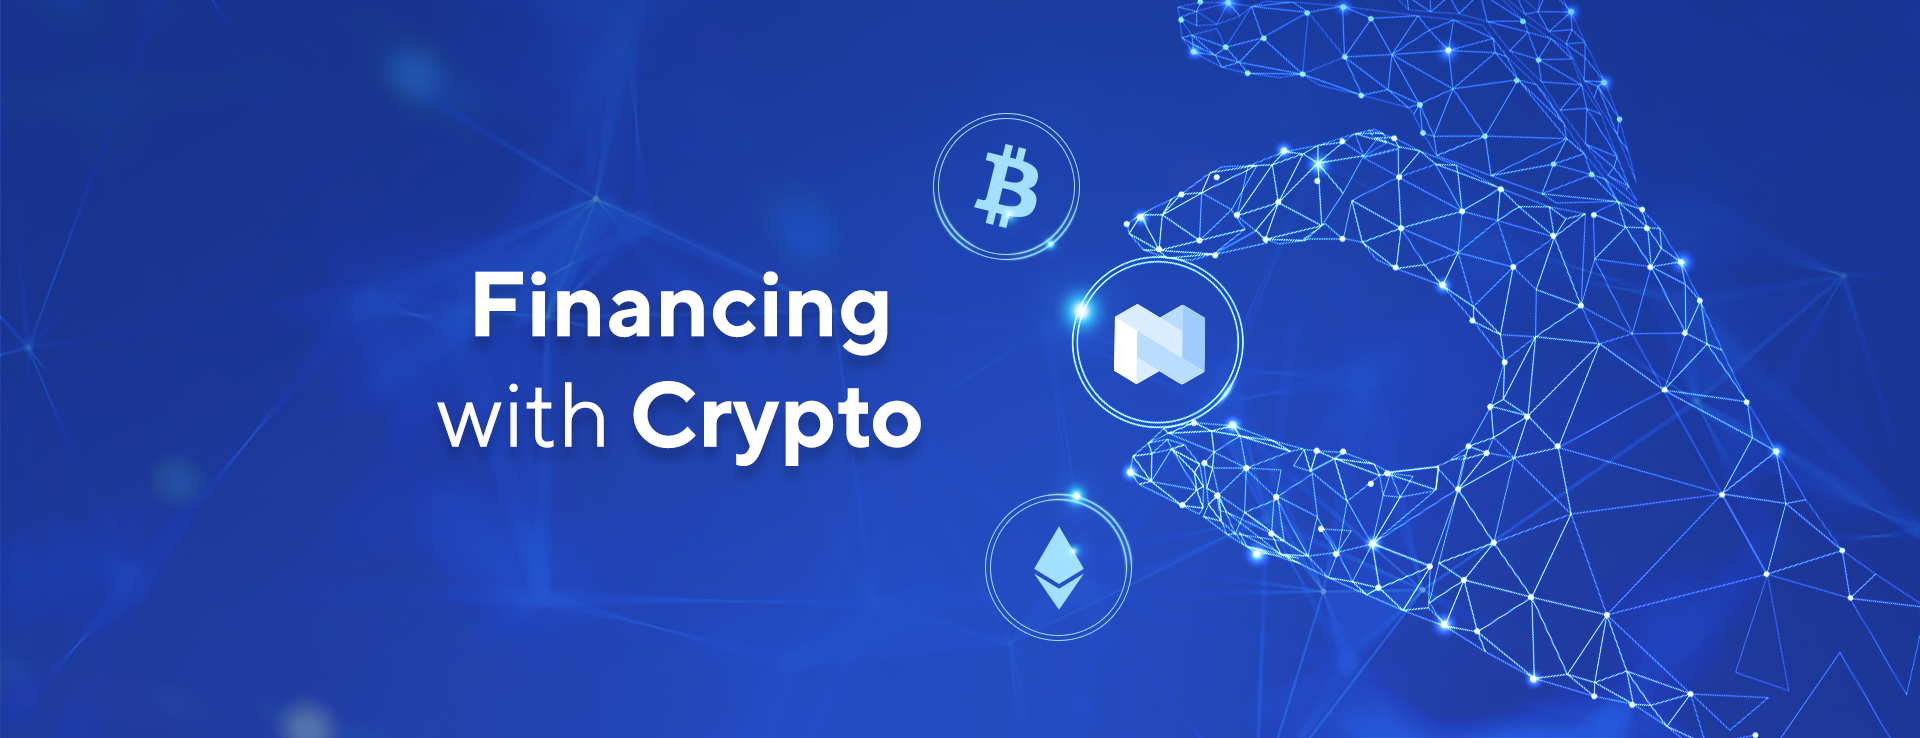 Financing with Crypto